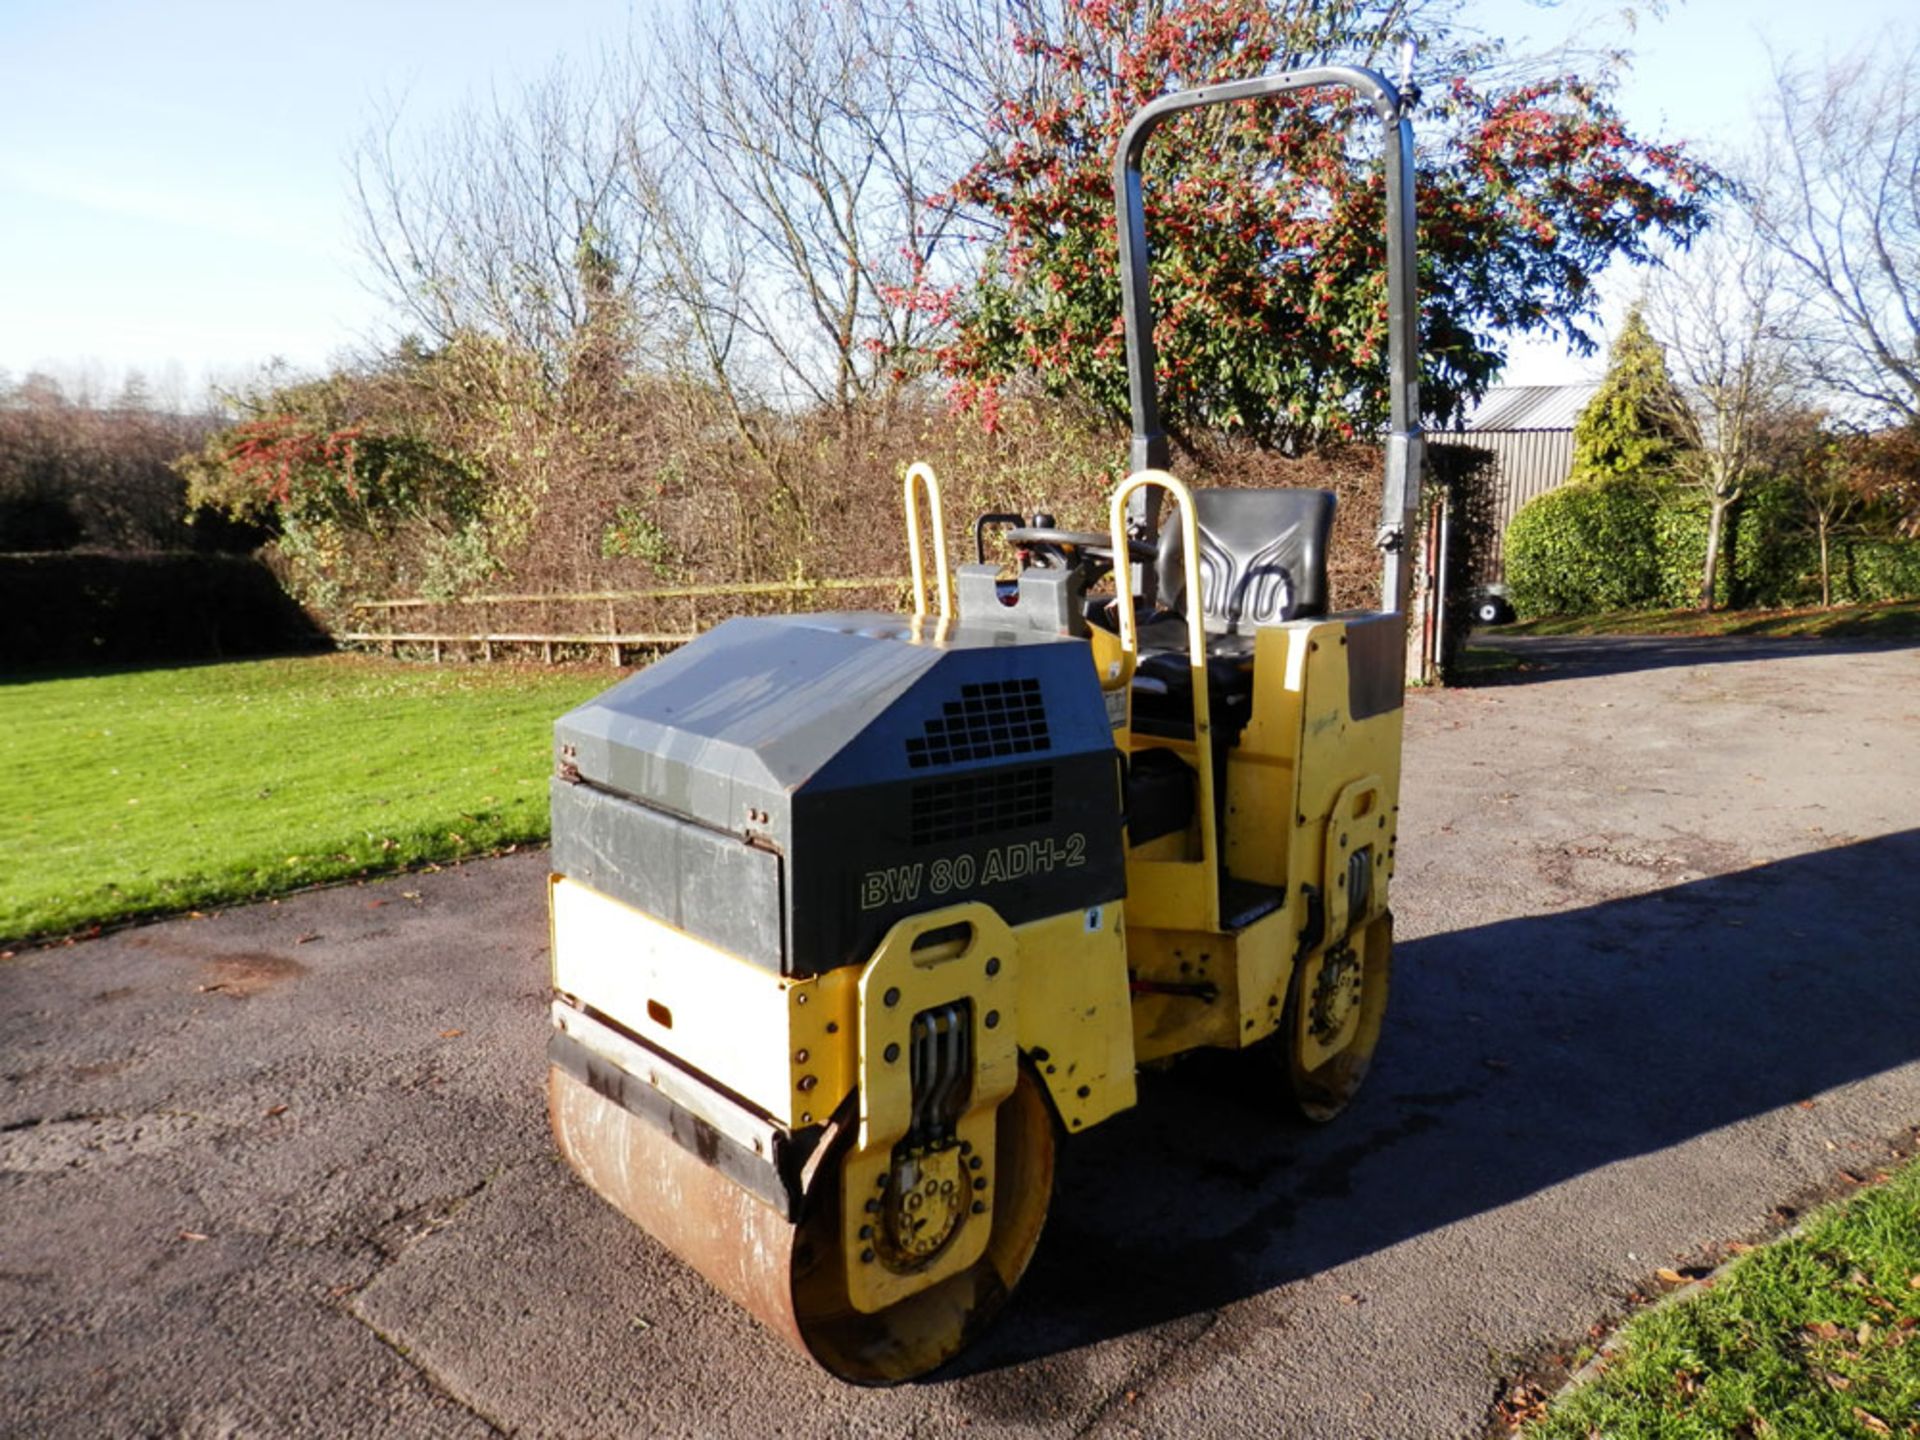 2007 Bomag BW80 ADH-2 Tandem Vibratory Roller - Image 9 of 9